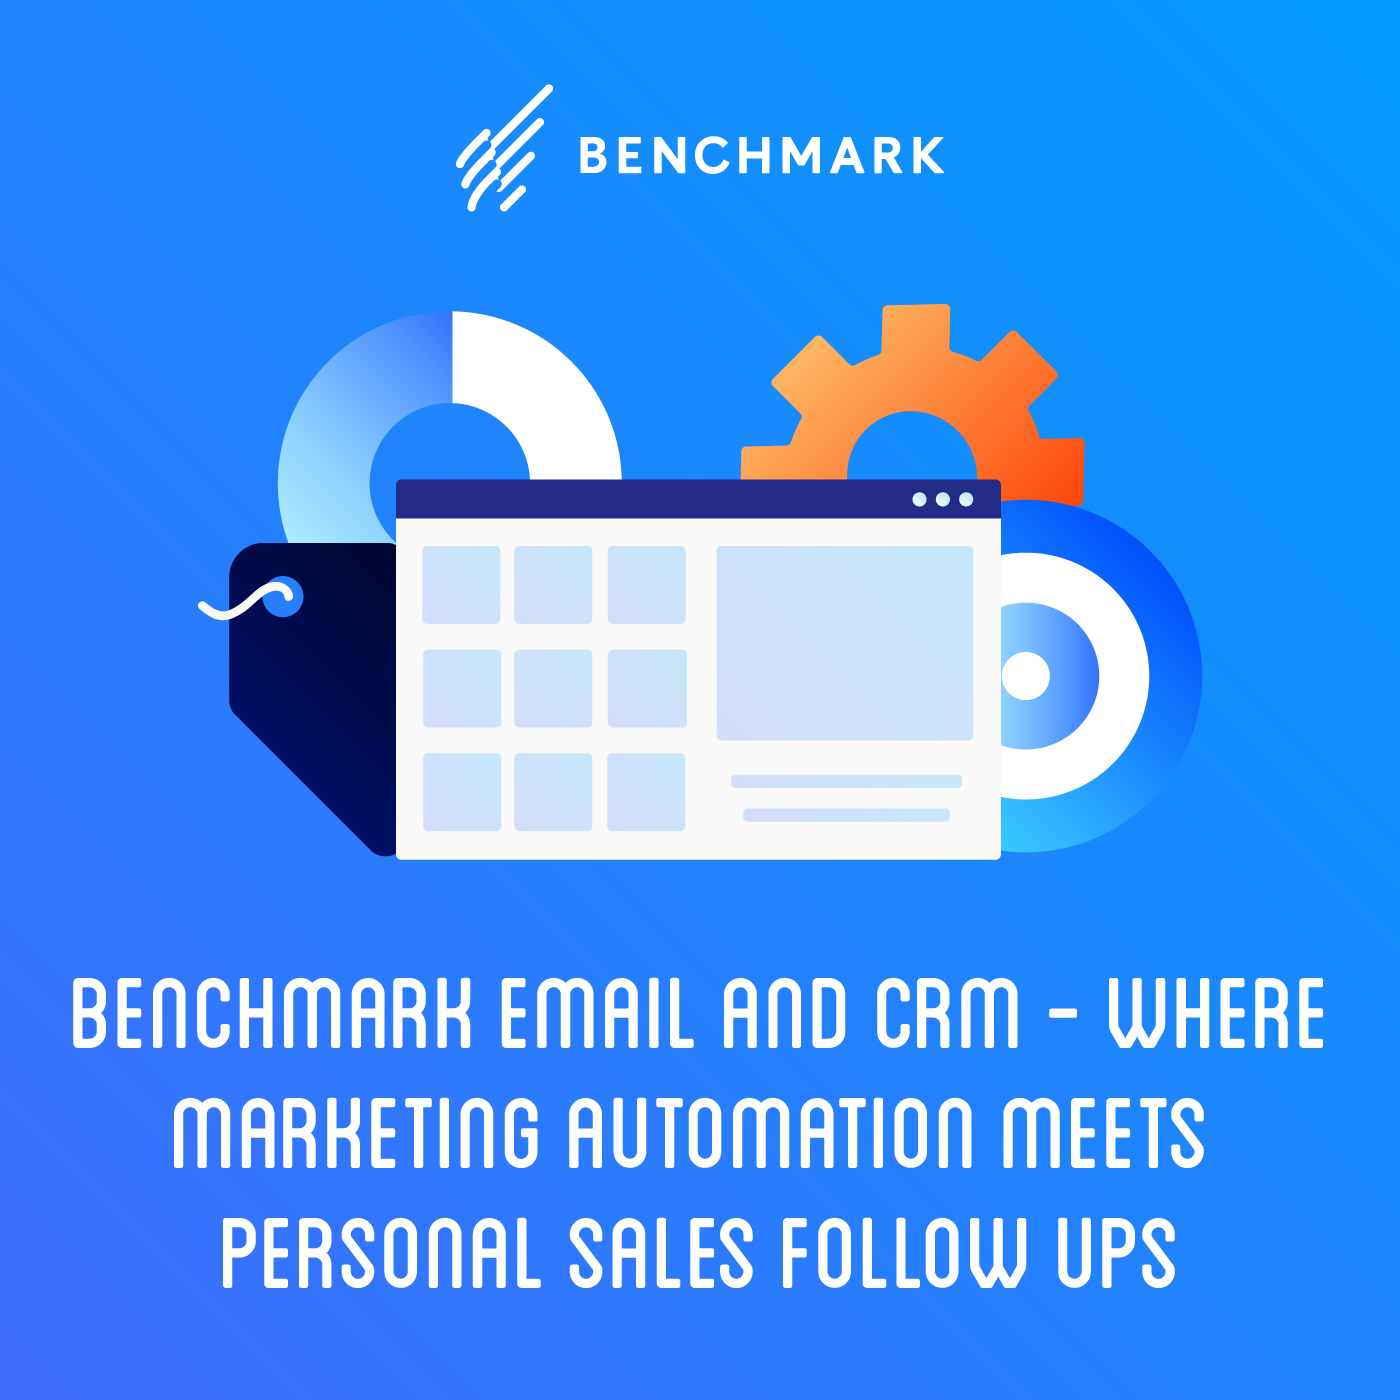 Benchmark Email and CRM - Where Marketing Automation Meets Personal Sales Follow Ups